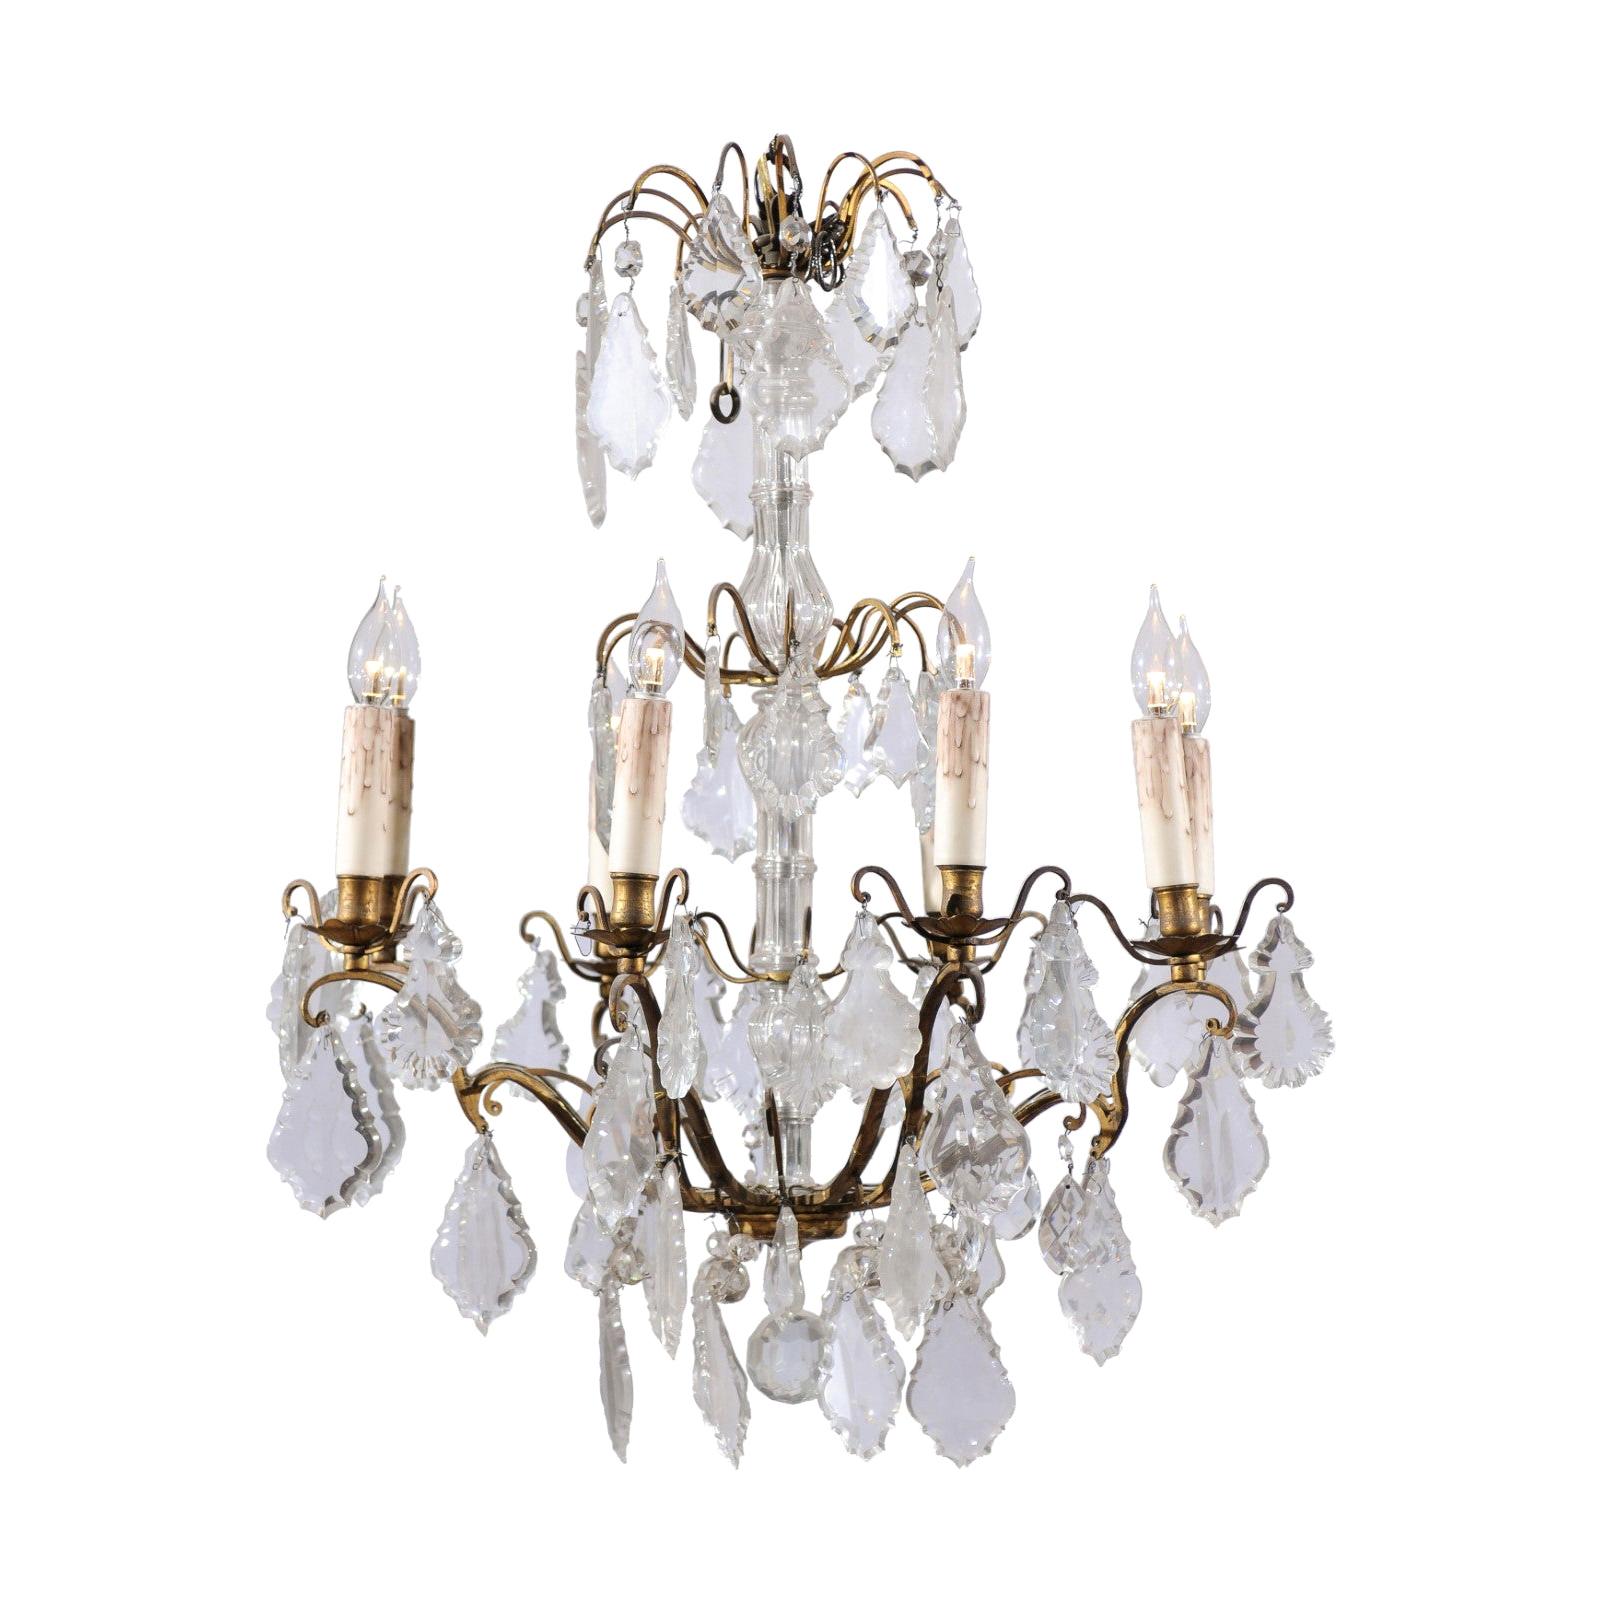 French 1860s Napoleon III Eight-Light Crystal Chandelier with Brass Accents